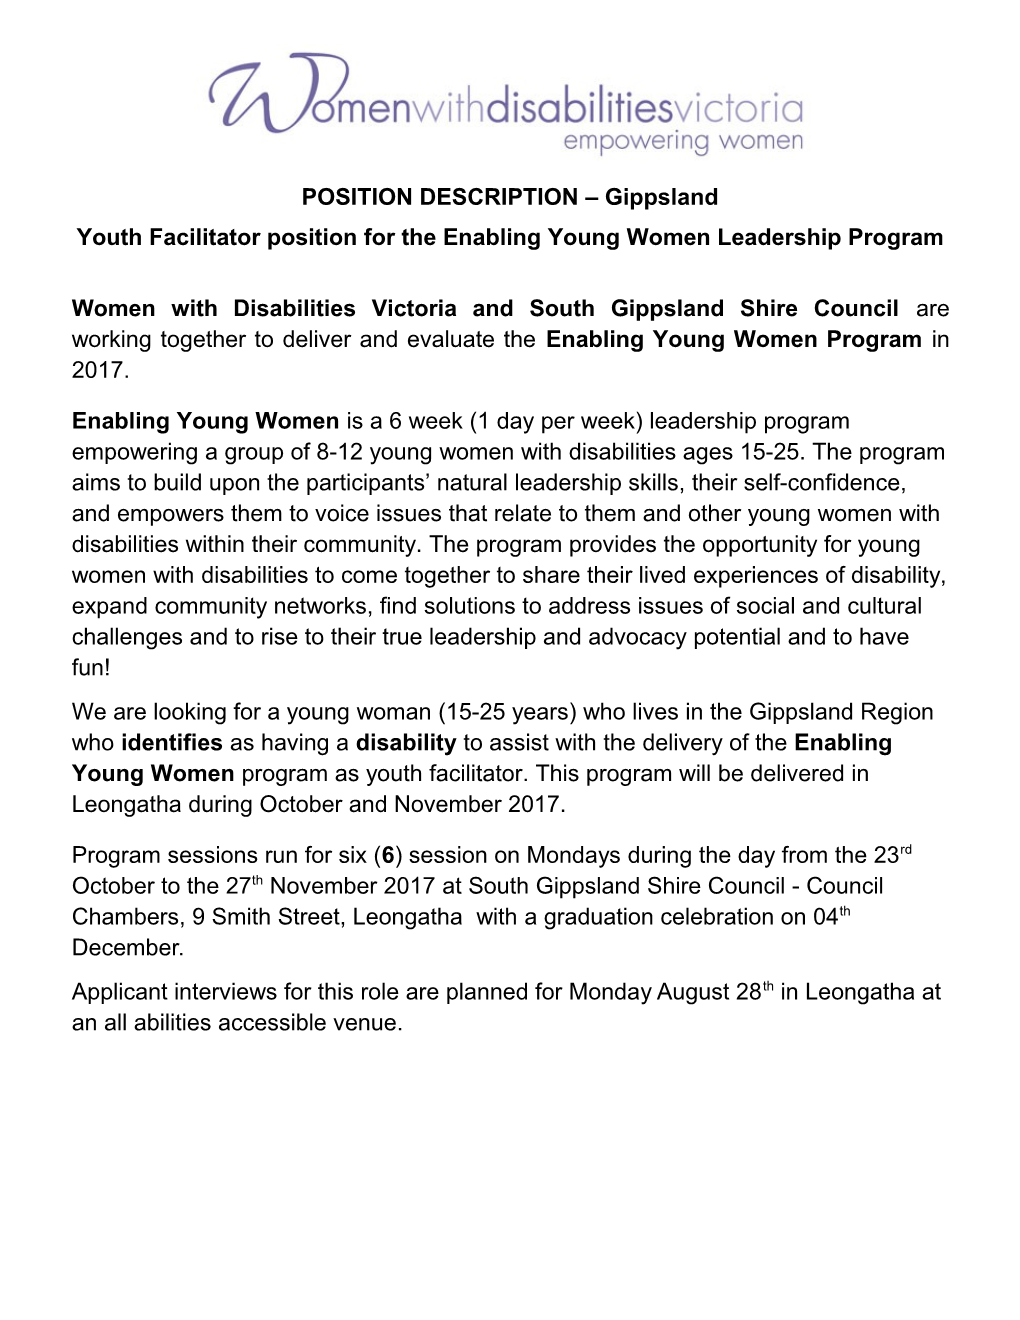 Youth Facilitator Position for the Enabling Young Women Leadership Program